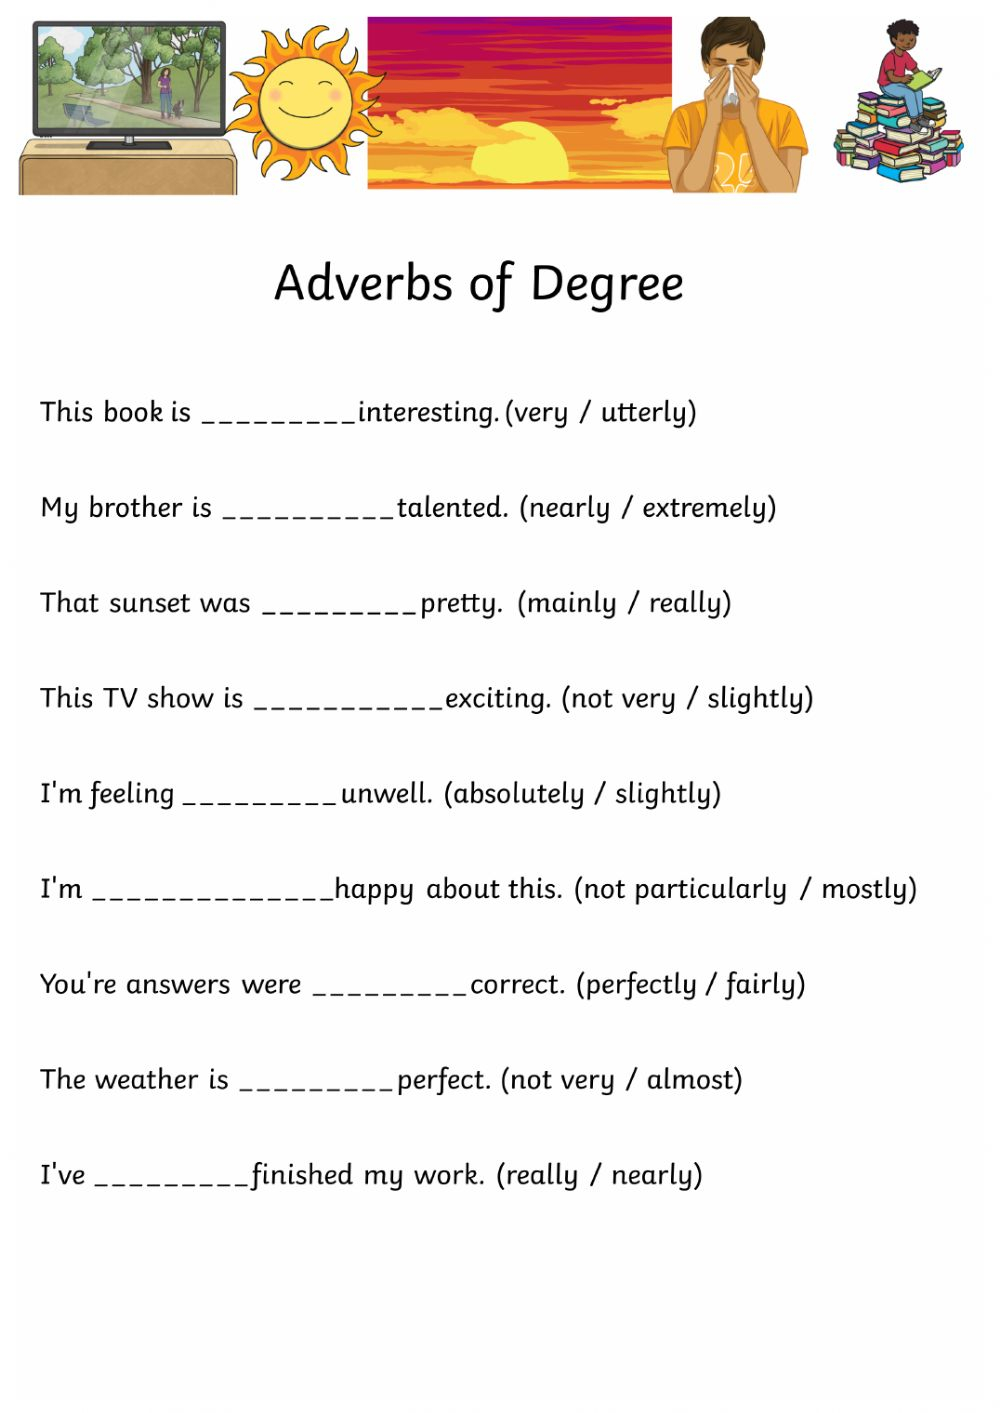 ADVERBS OF DEGREE Online Activity